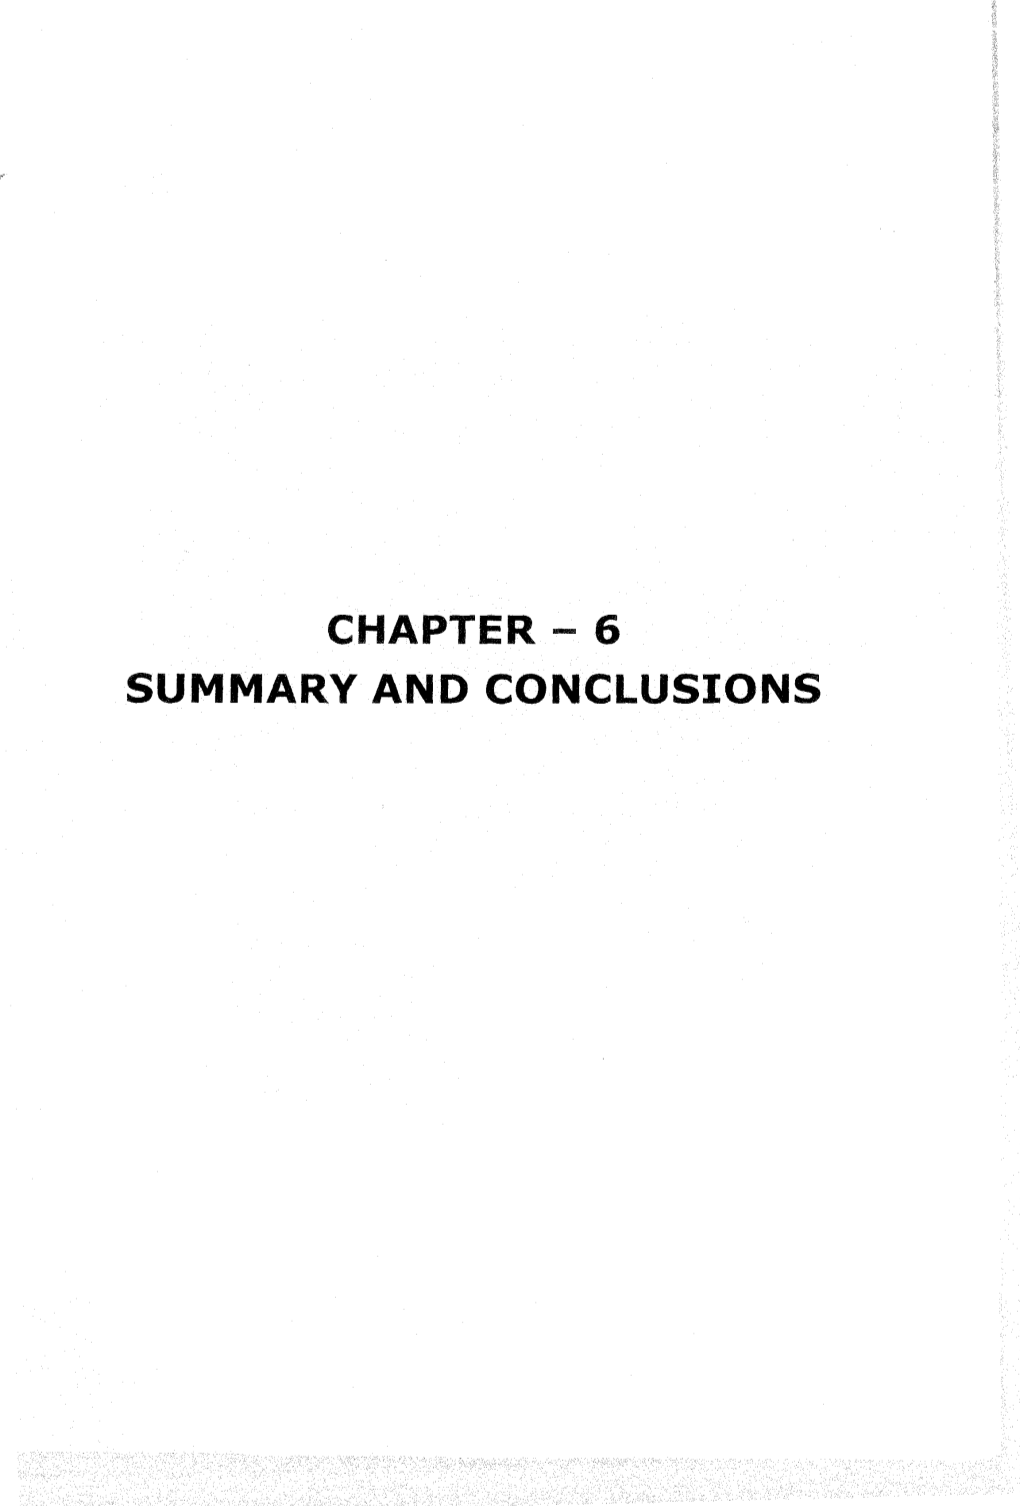 Summary and Conclusions Chapter- 6